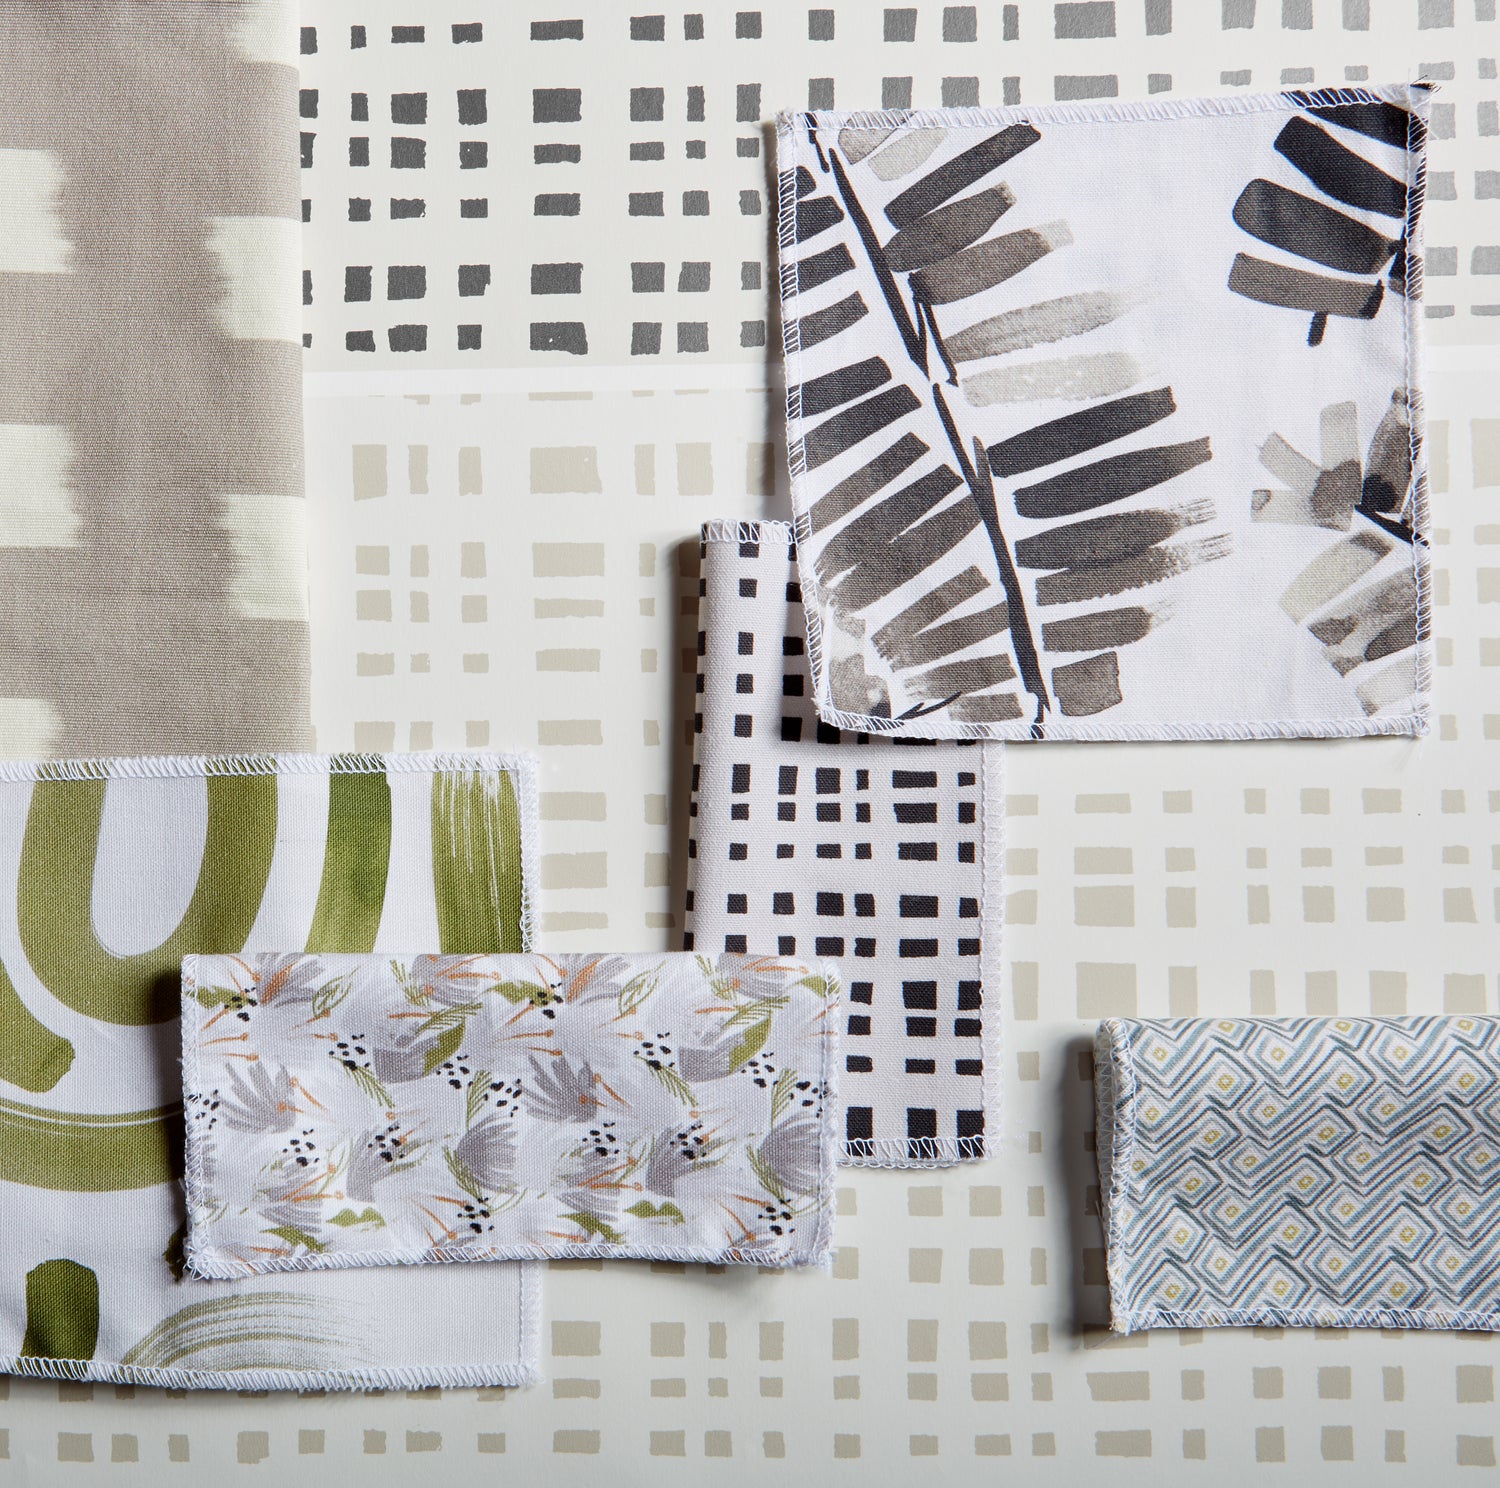 Interior design moodboard and fabric inspirations with Grey Floral Printed swatch, Cream Gingham Pattern Printed Swatch, and Black Gingham printed swatch.